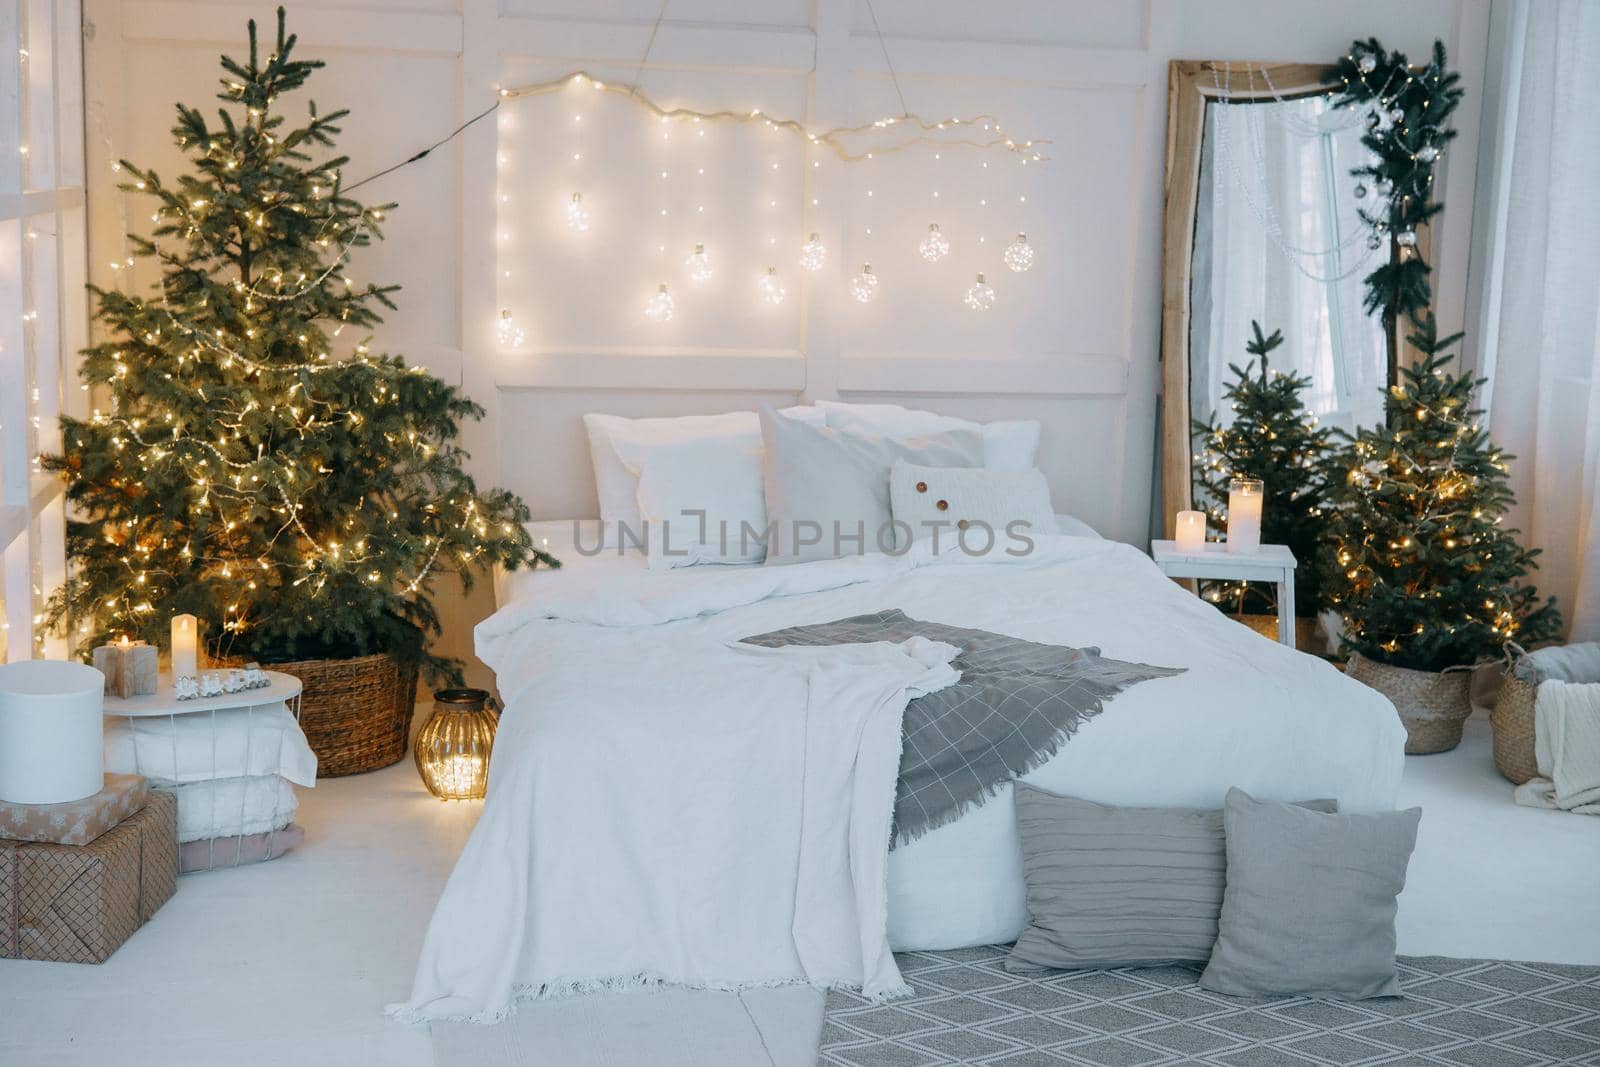 Tver, Russia-November 15, 2019. Embellished mirror, a large bed and a living Christmas tree with lights. New year's interior in bright colors, festive atmosphere, decor, garlands, gifts by Annu1tochka